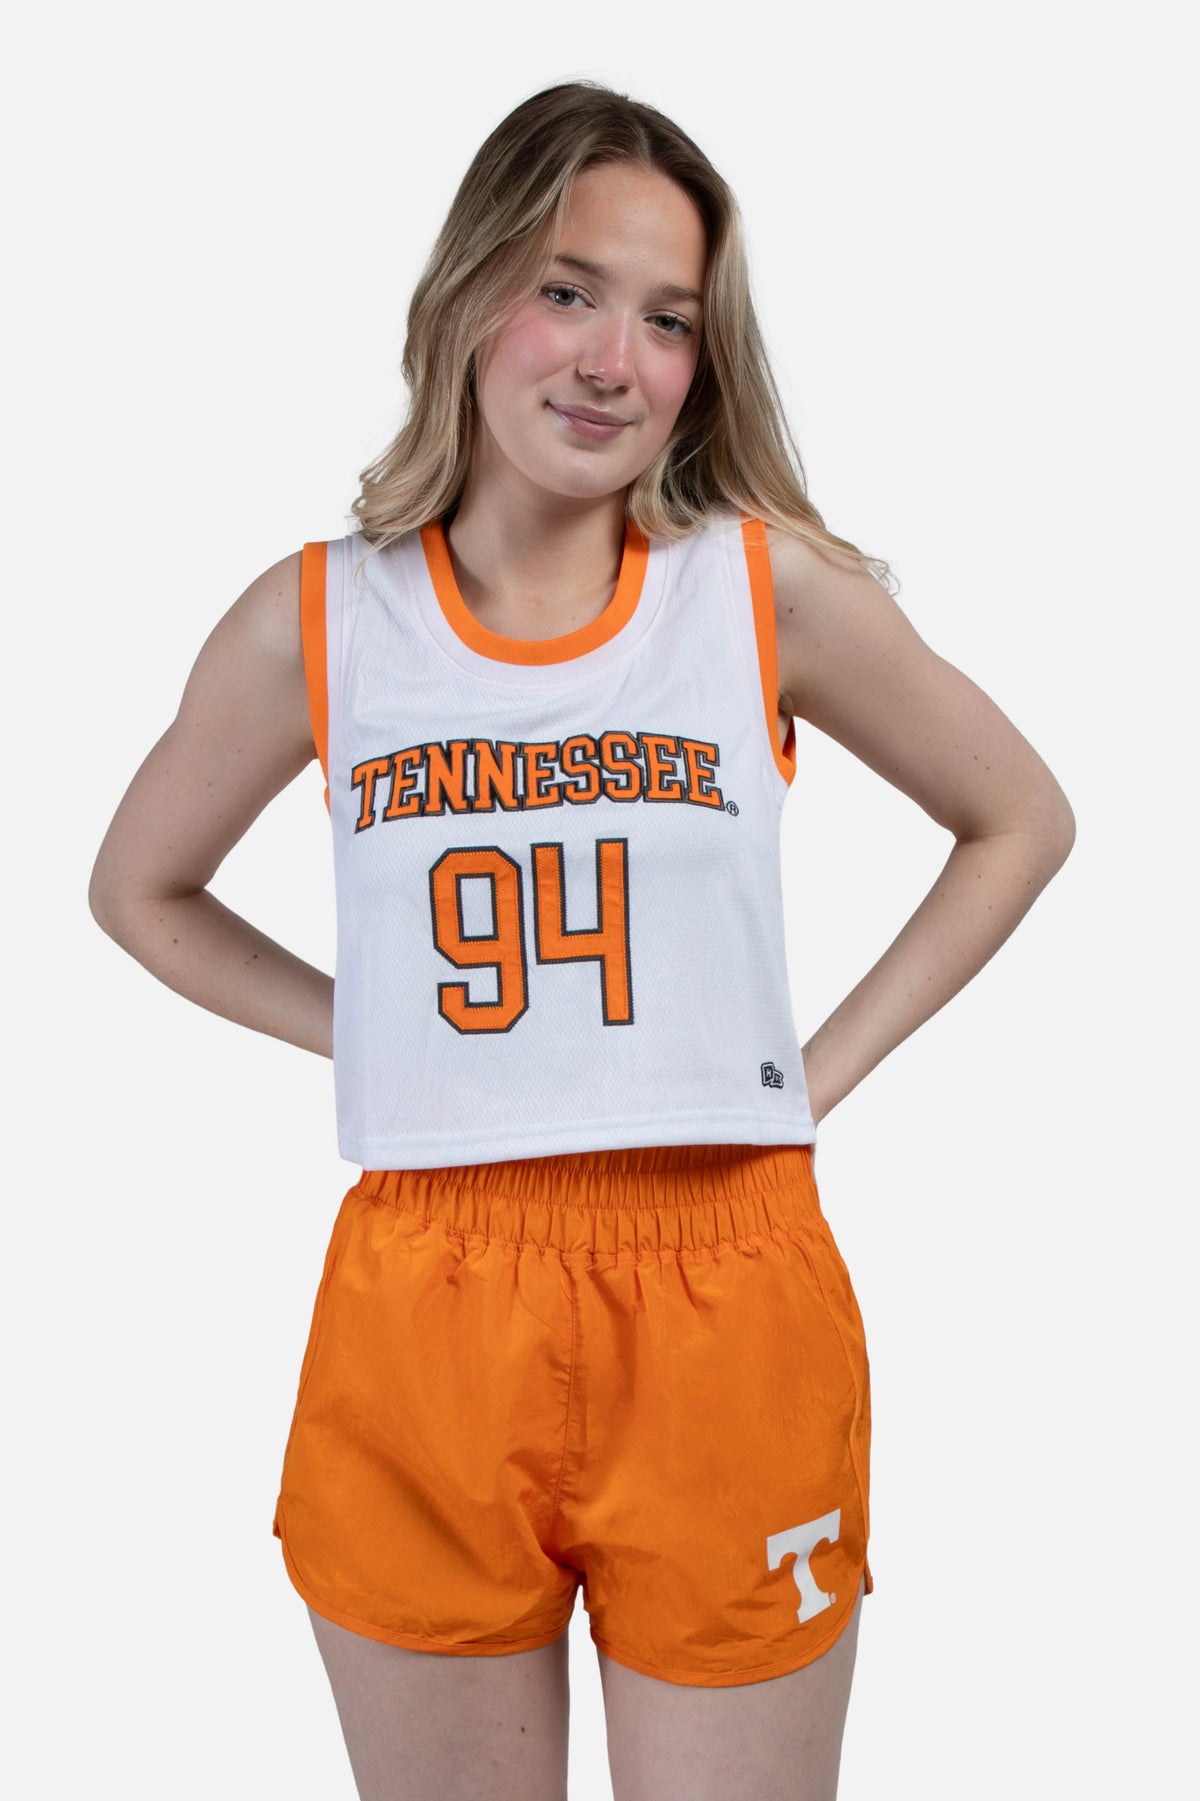 University of Tennessee Basketball Top